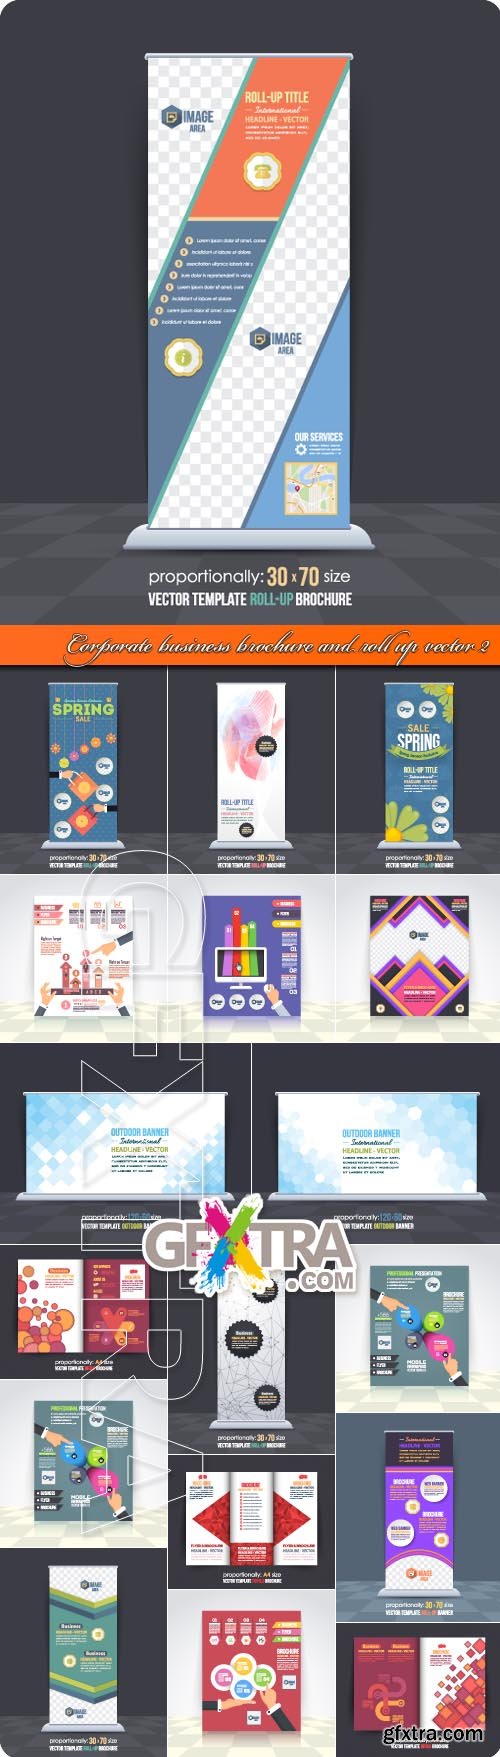 Corporate business brochure and roll up vector 2